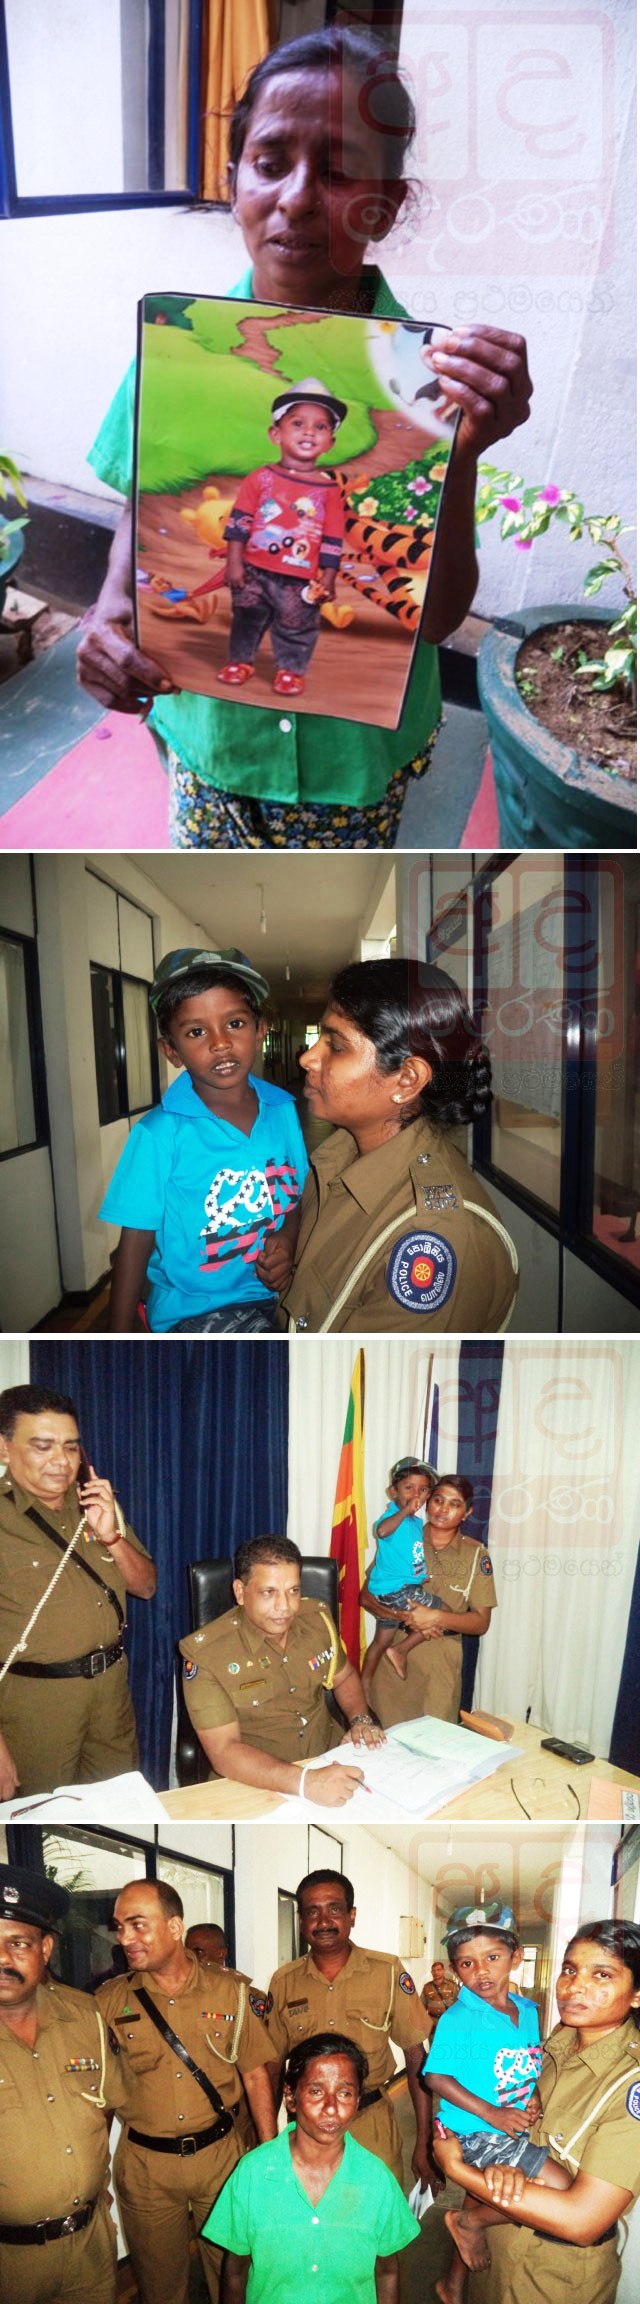 PICTURES: Kidnapped child found in Dambulla 10-months after